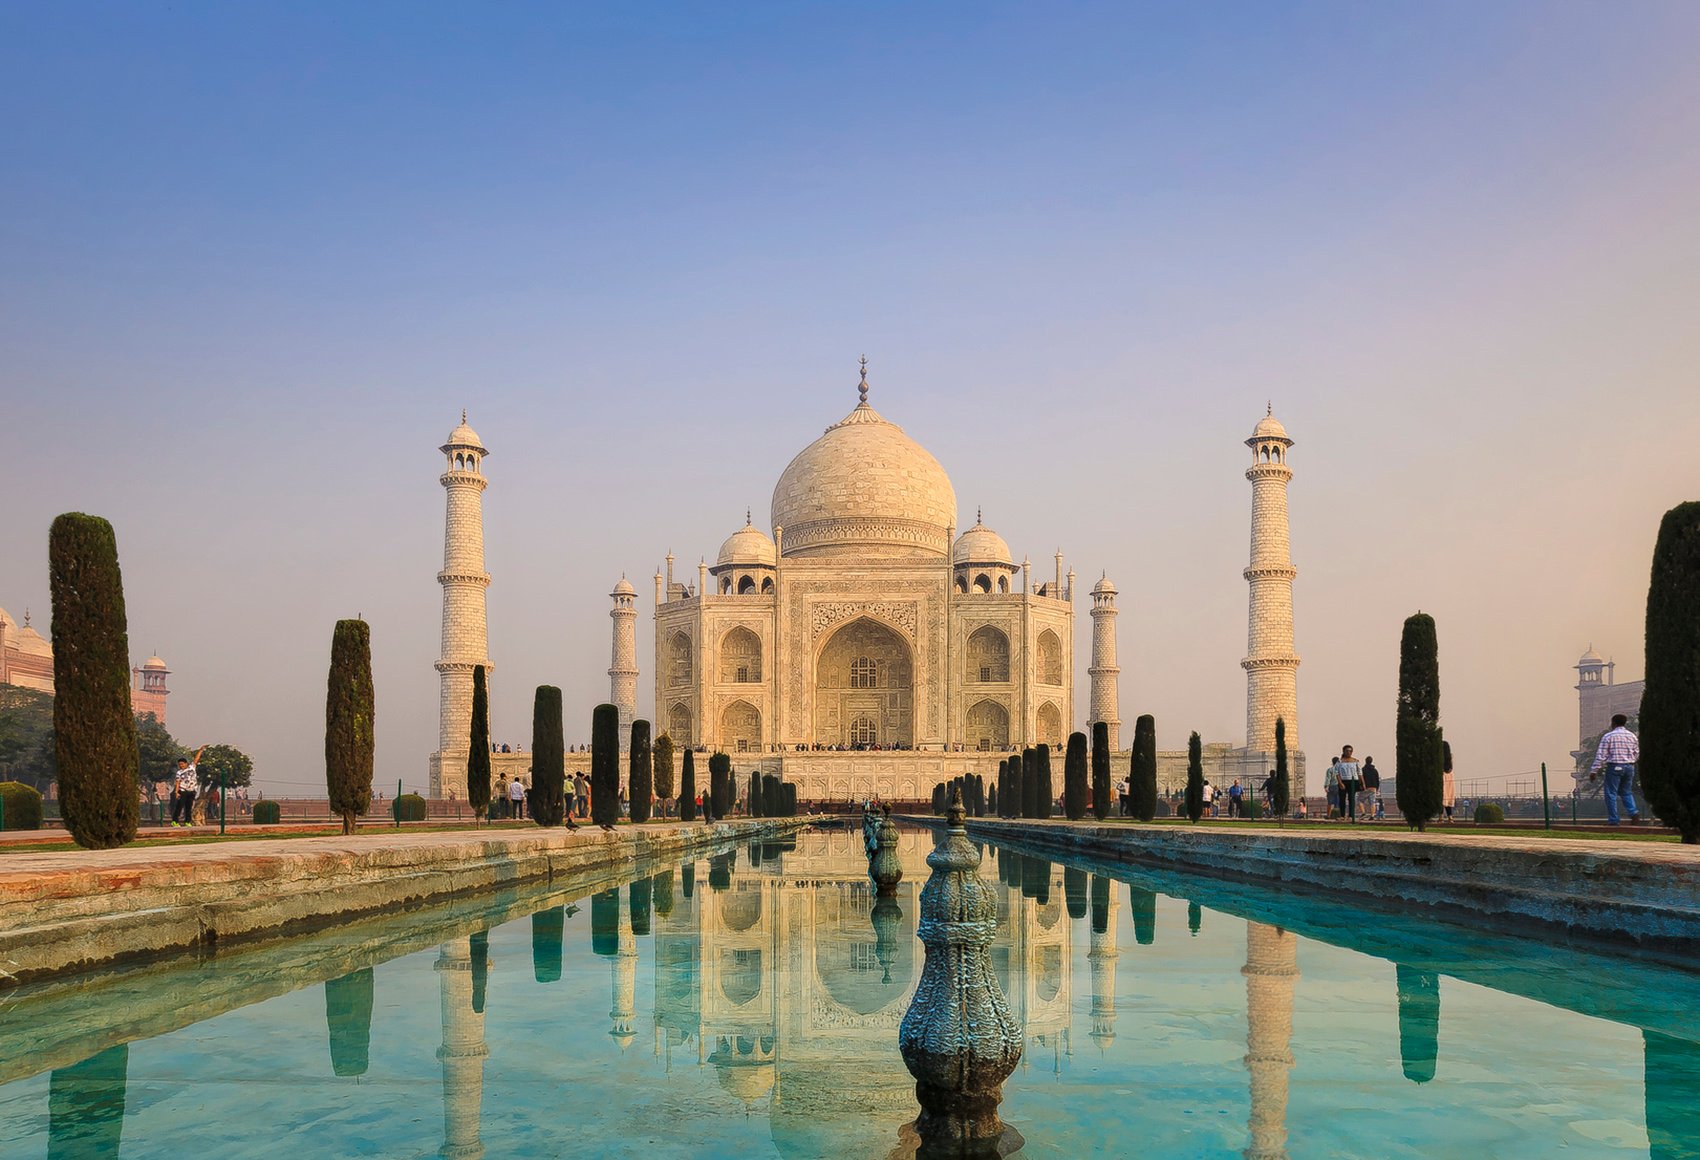 A shot of the Taj Mahal mausoleum and its reflection in a pool in Agra, Uttar Pradesh, India